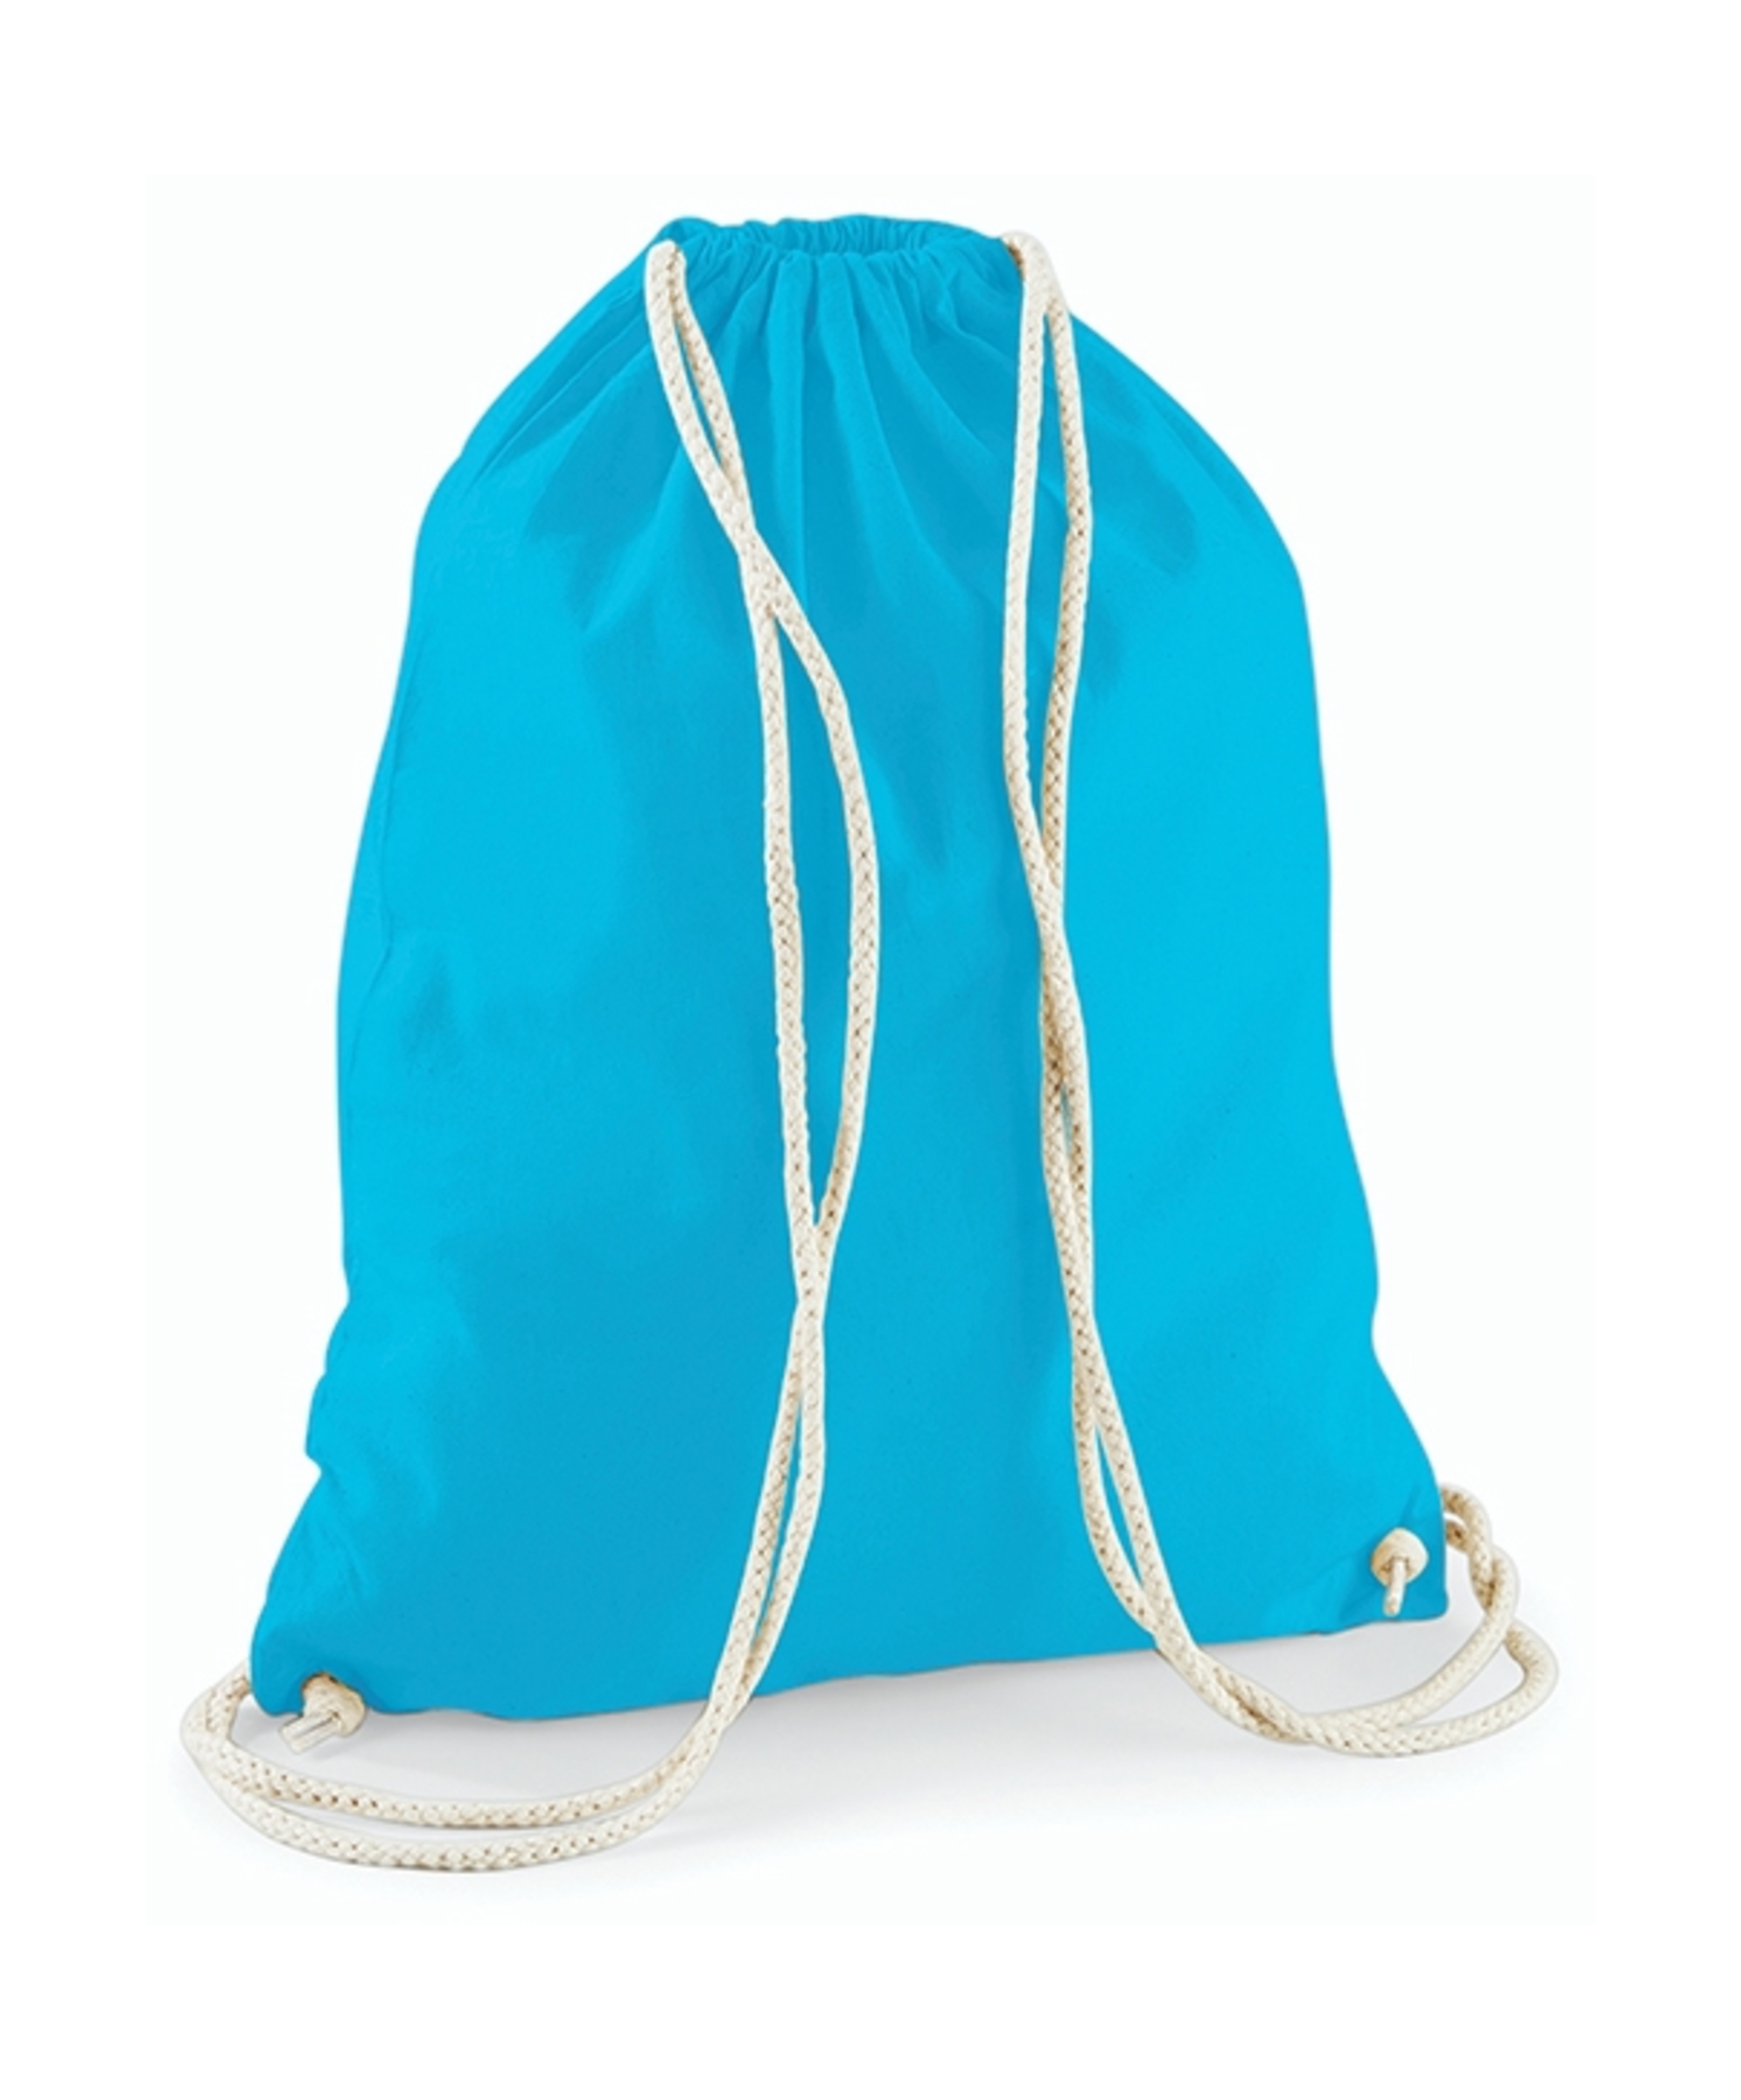 Westford Mill Cotton Gymsack - Surf Blue - One Size